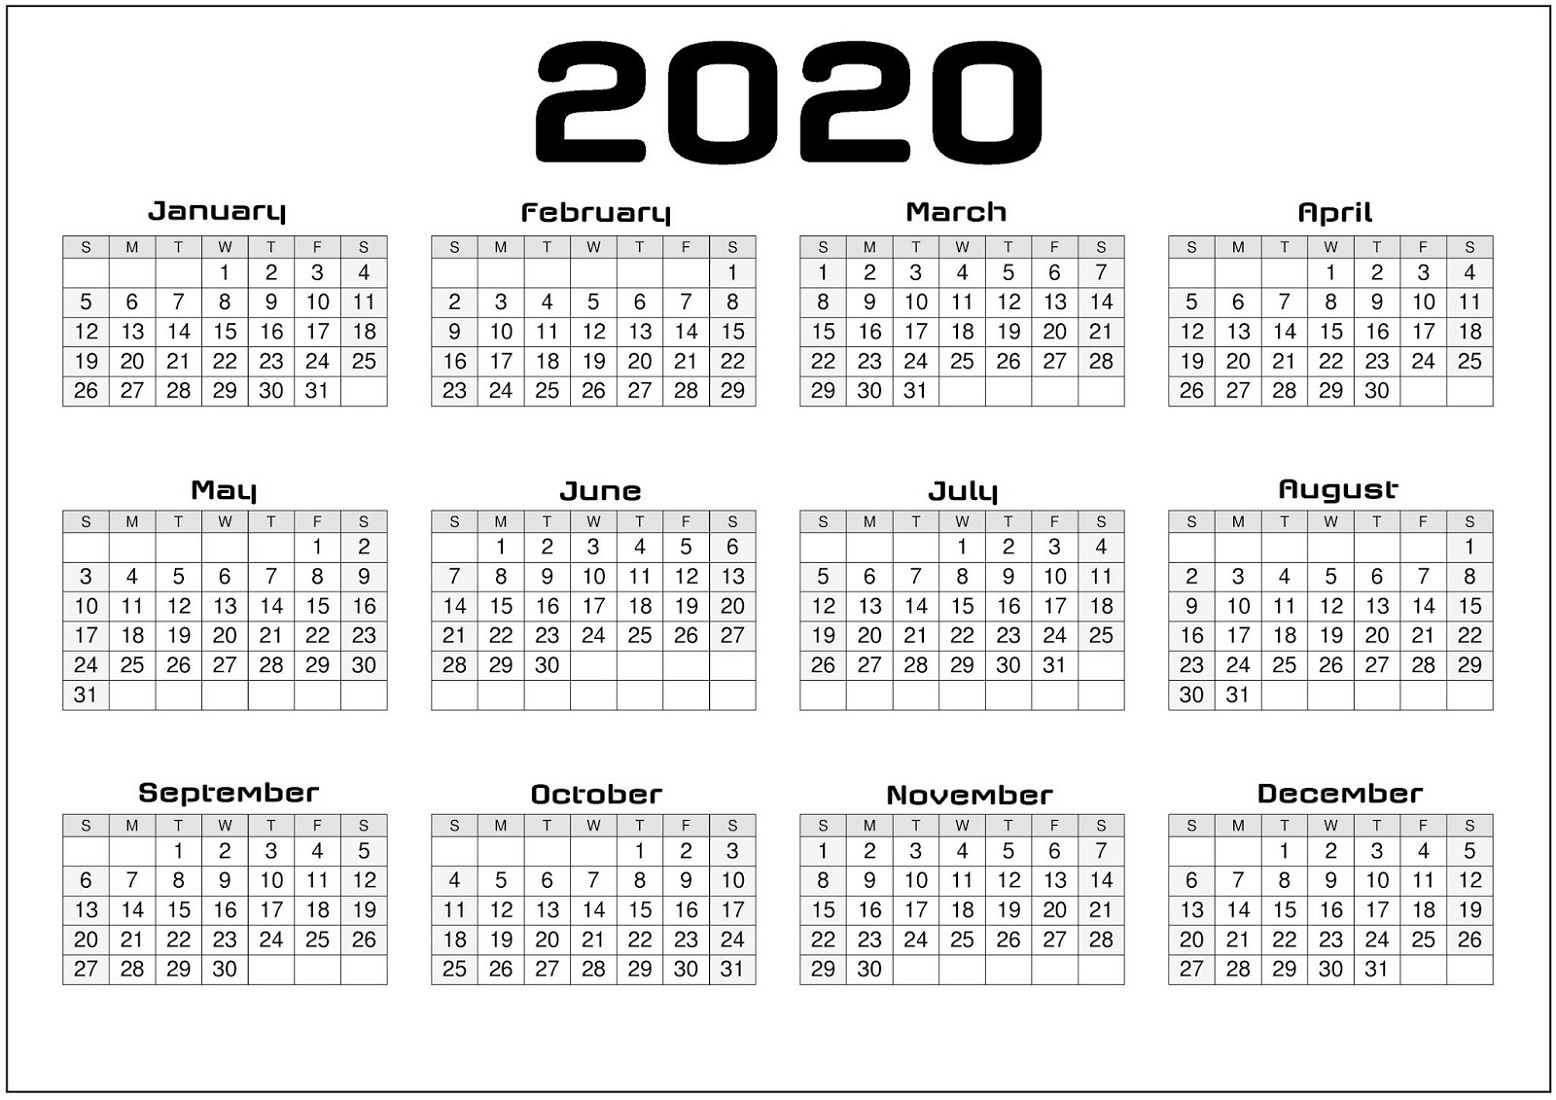 Yearly Calendar 2020 Printable Free For Agenda | Calendar Calendar Lab 2020 Printable Calendar